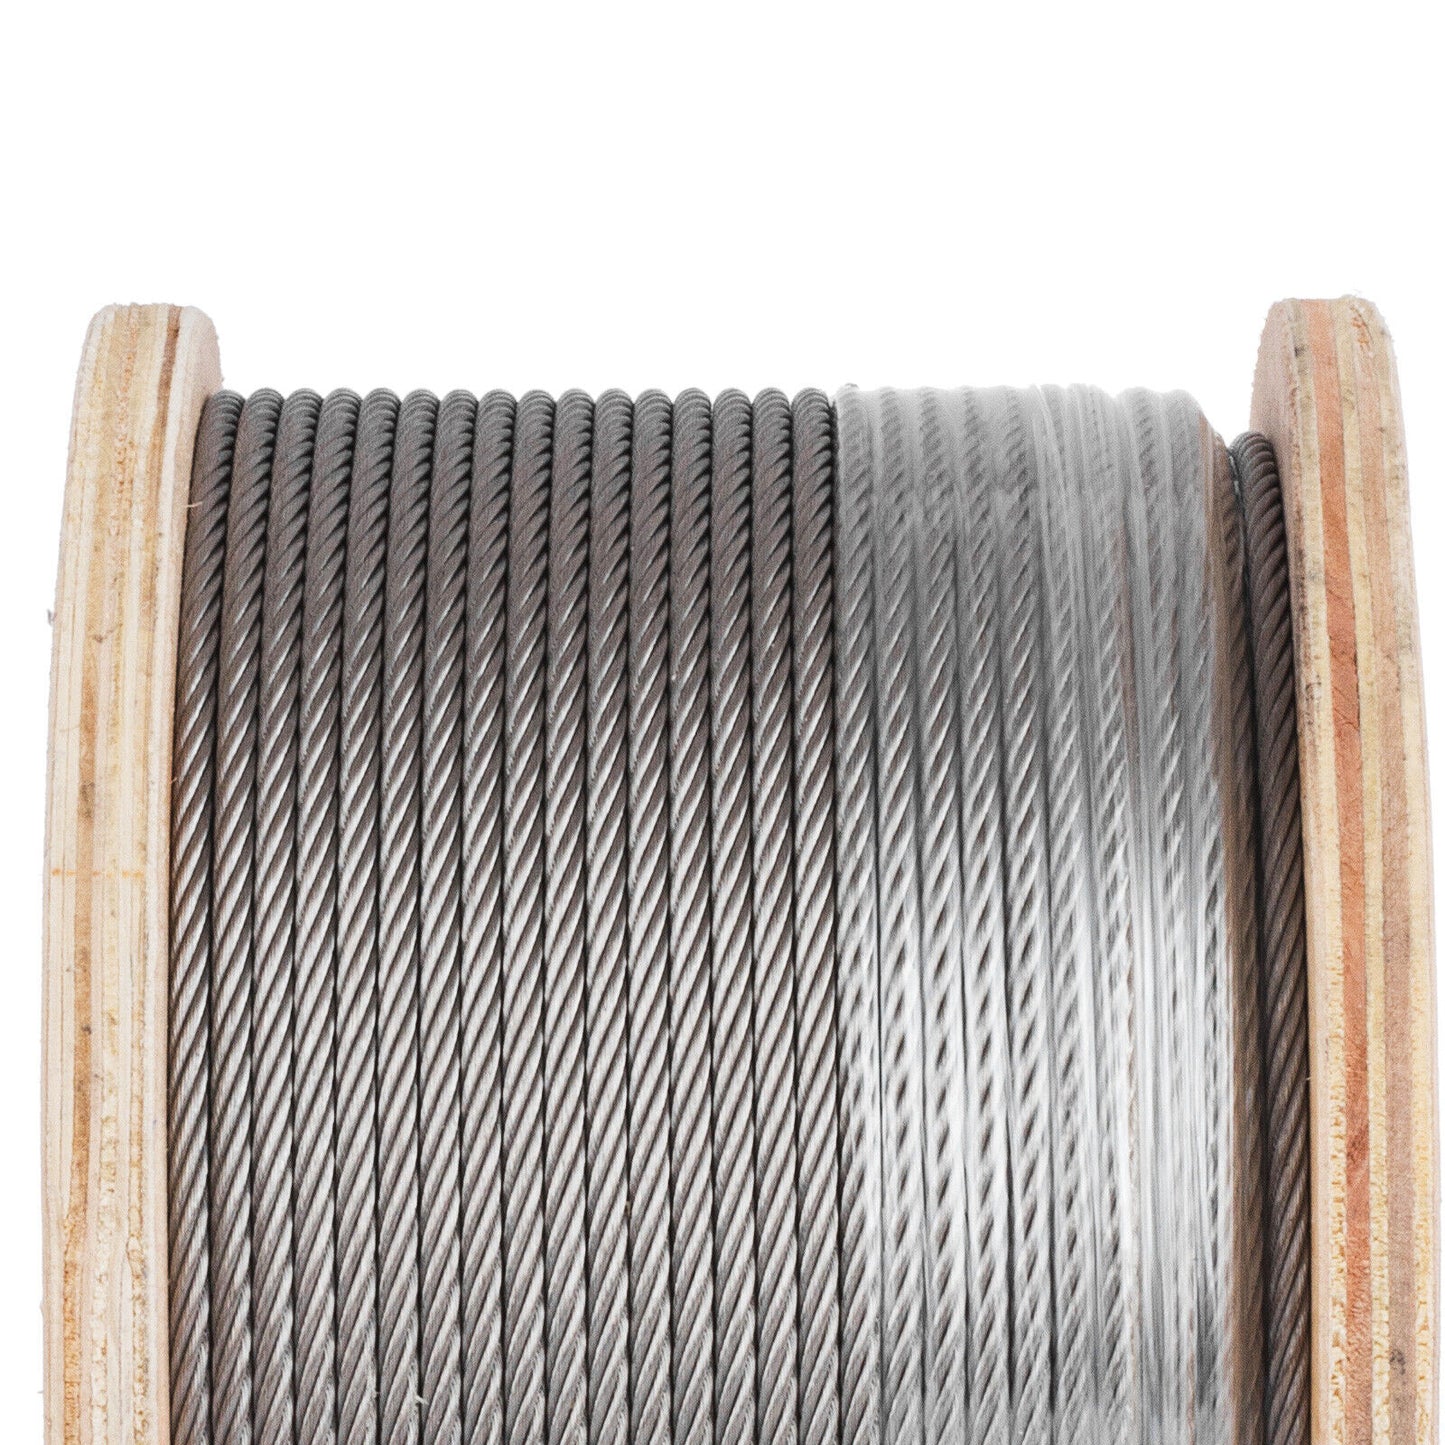 1000FT Stainless Cable Railing Type 304 Steel Aircraft Wire Rope, 3/16",7x19